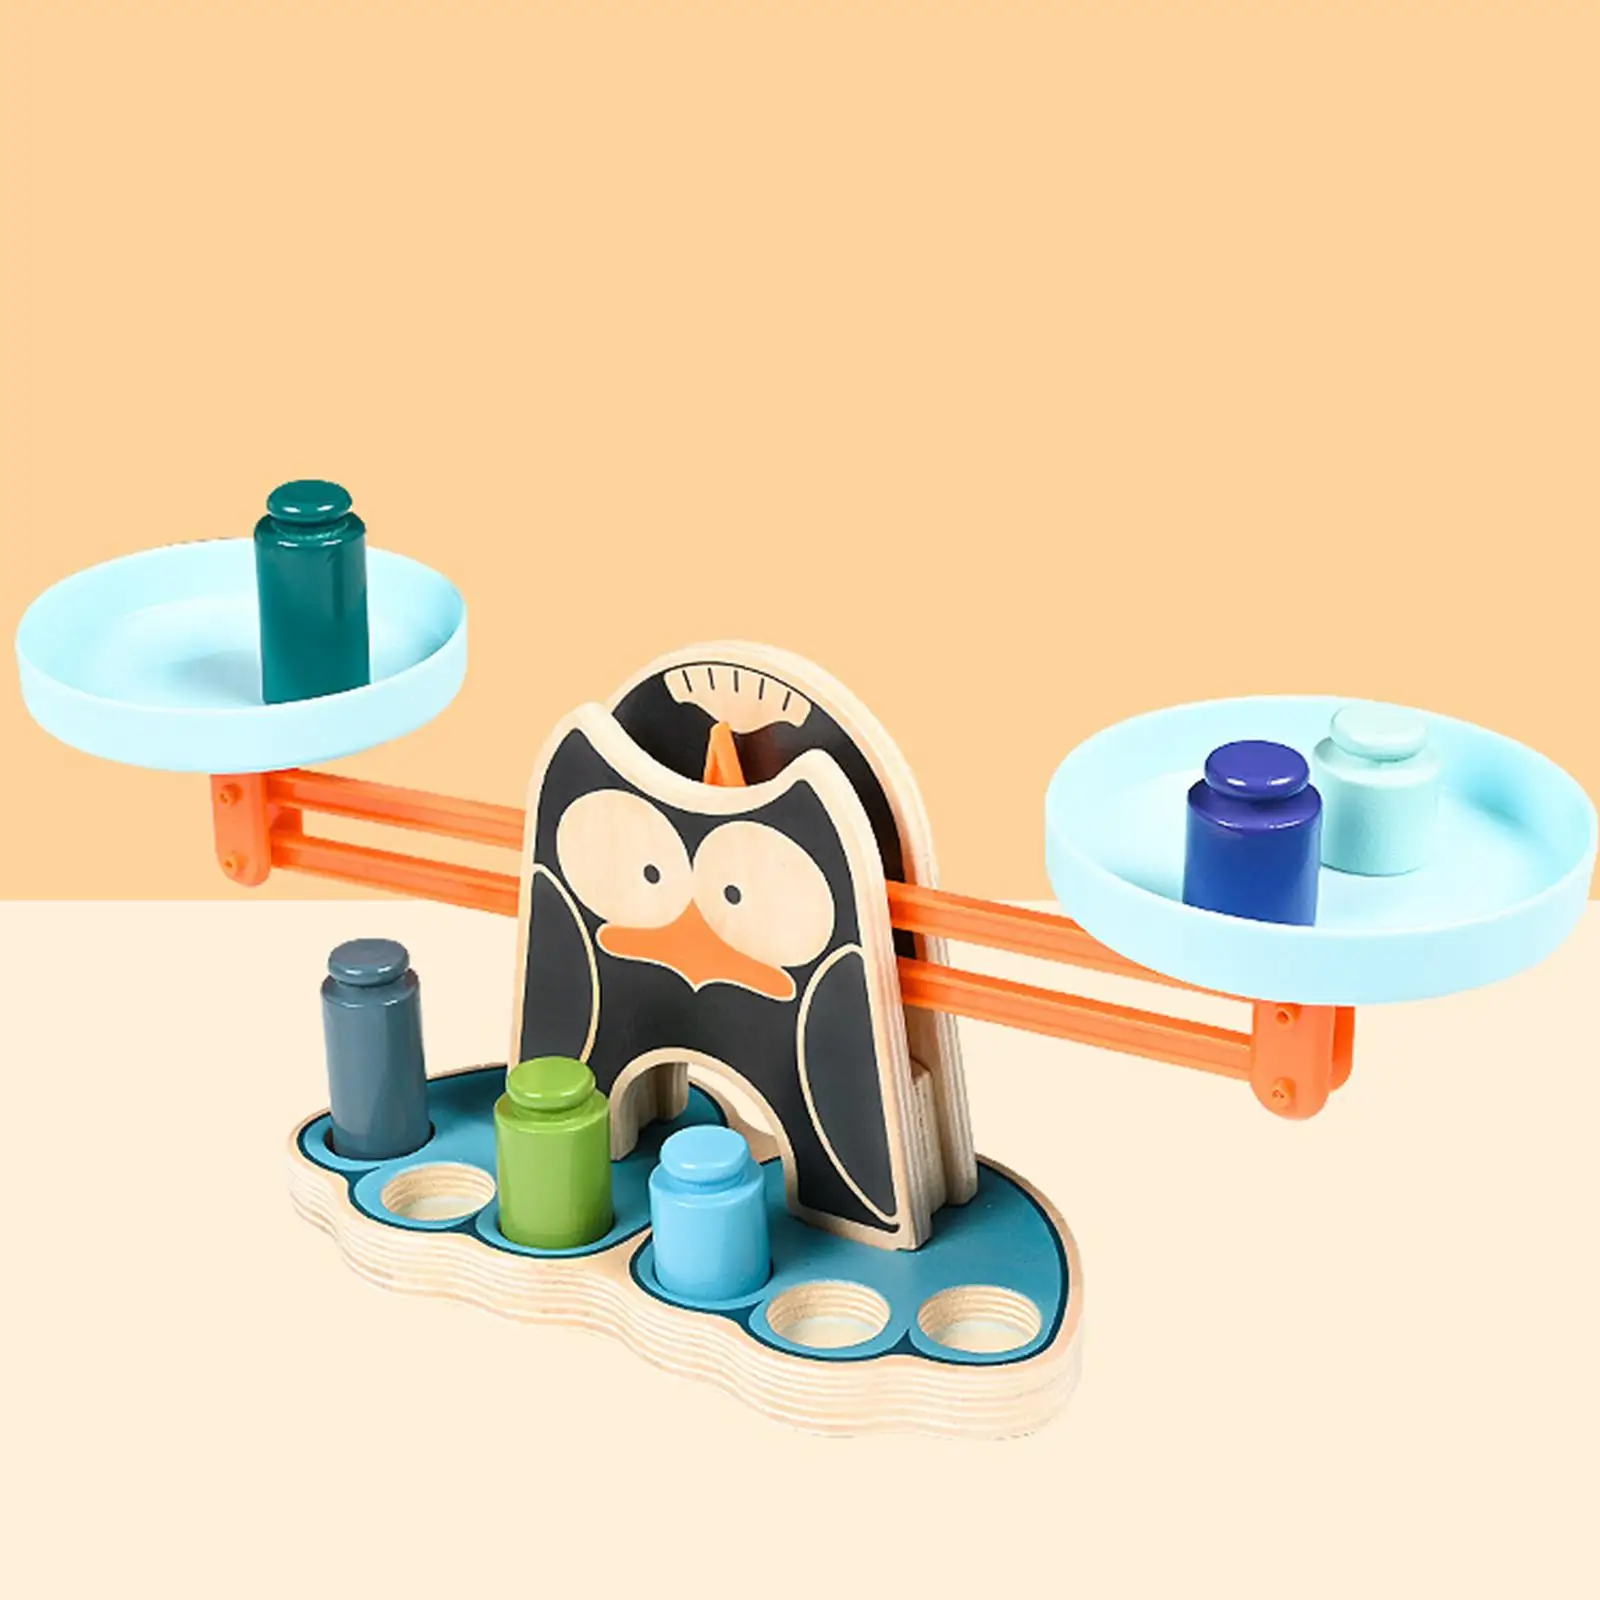 Penguin Balance Board Game Number Counting Toy Learning Toys for Kids Gifts